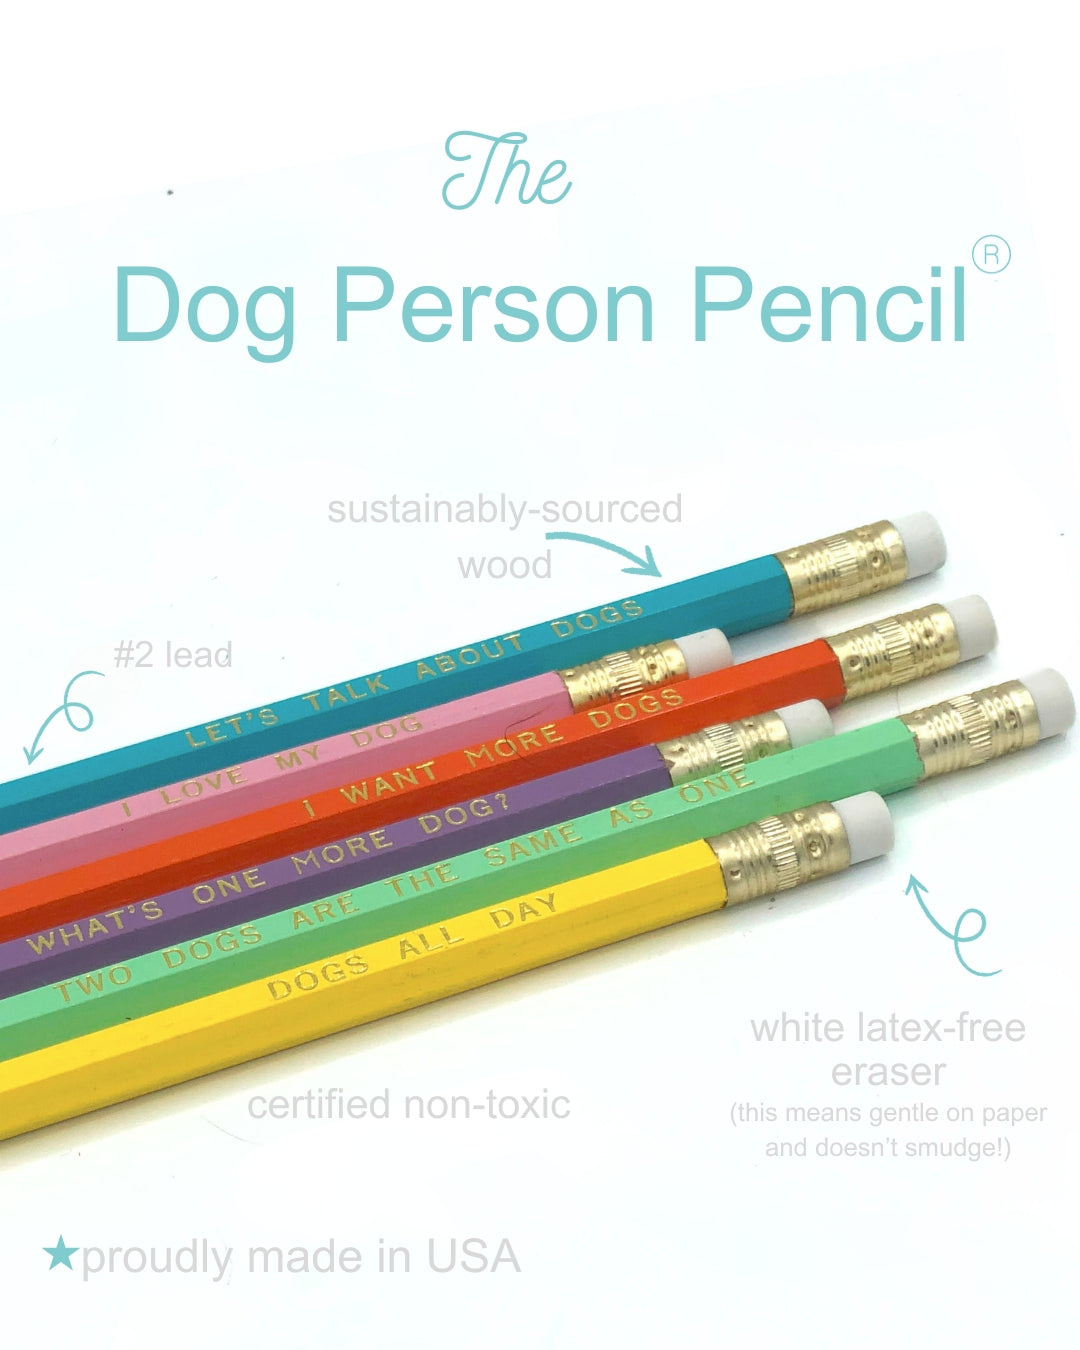 Let's Talk About Dogs - The Dog Person Pencil